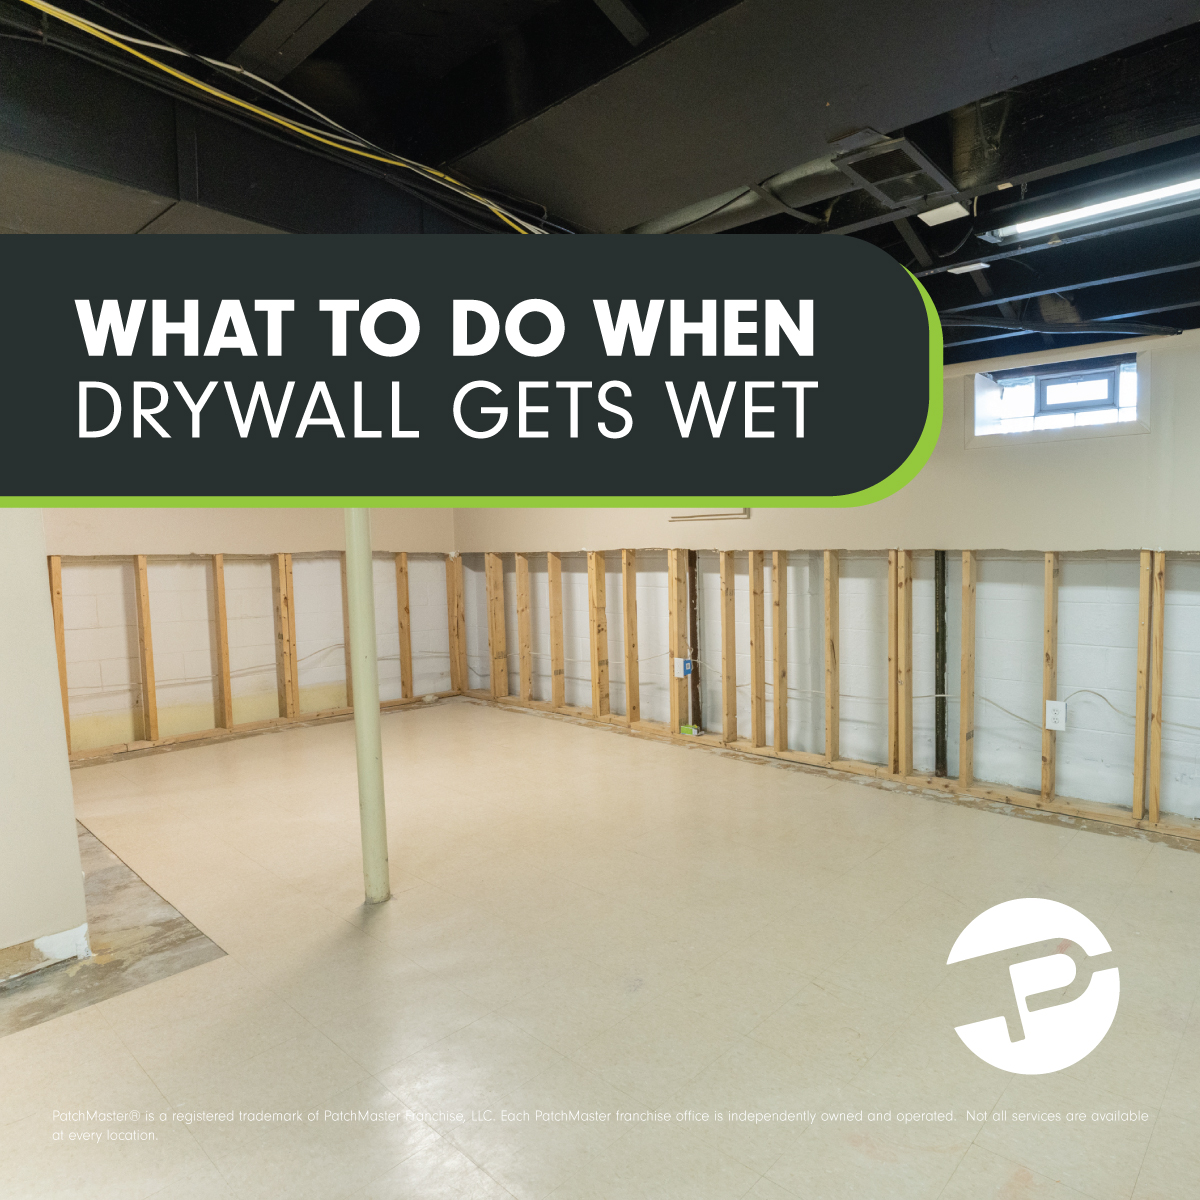 What to do When Drywall Gets Wet